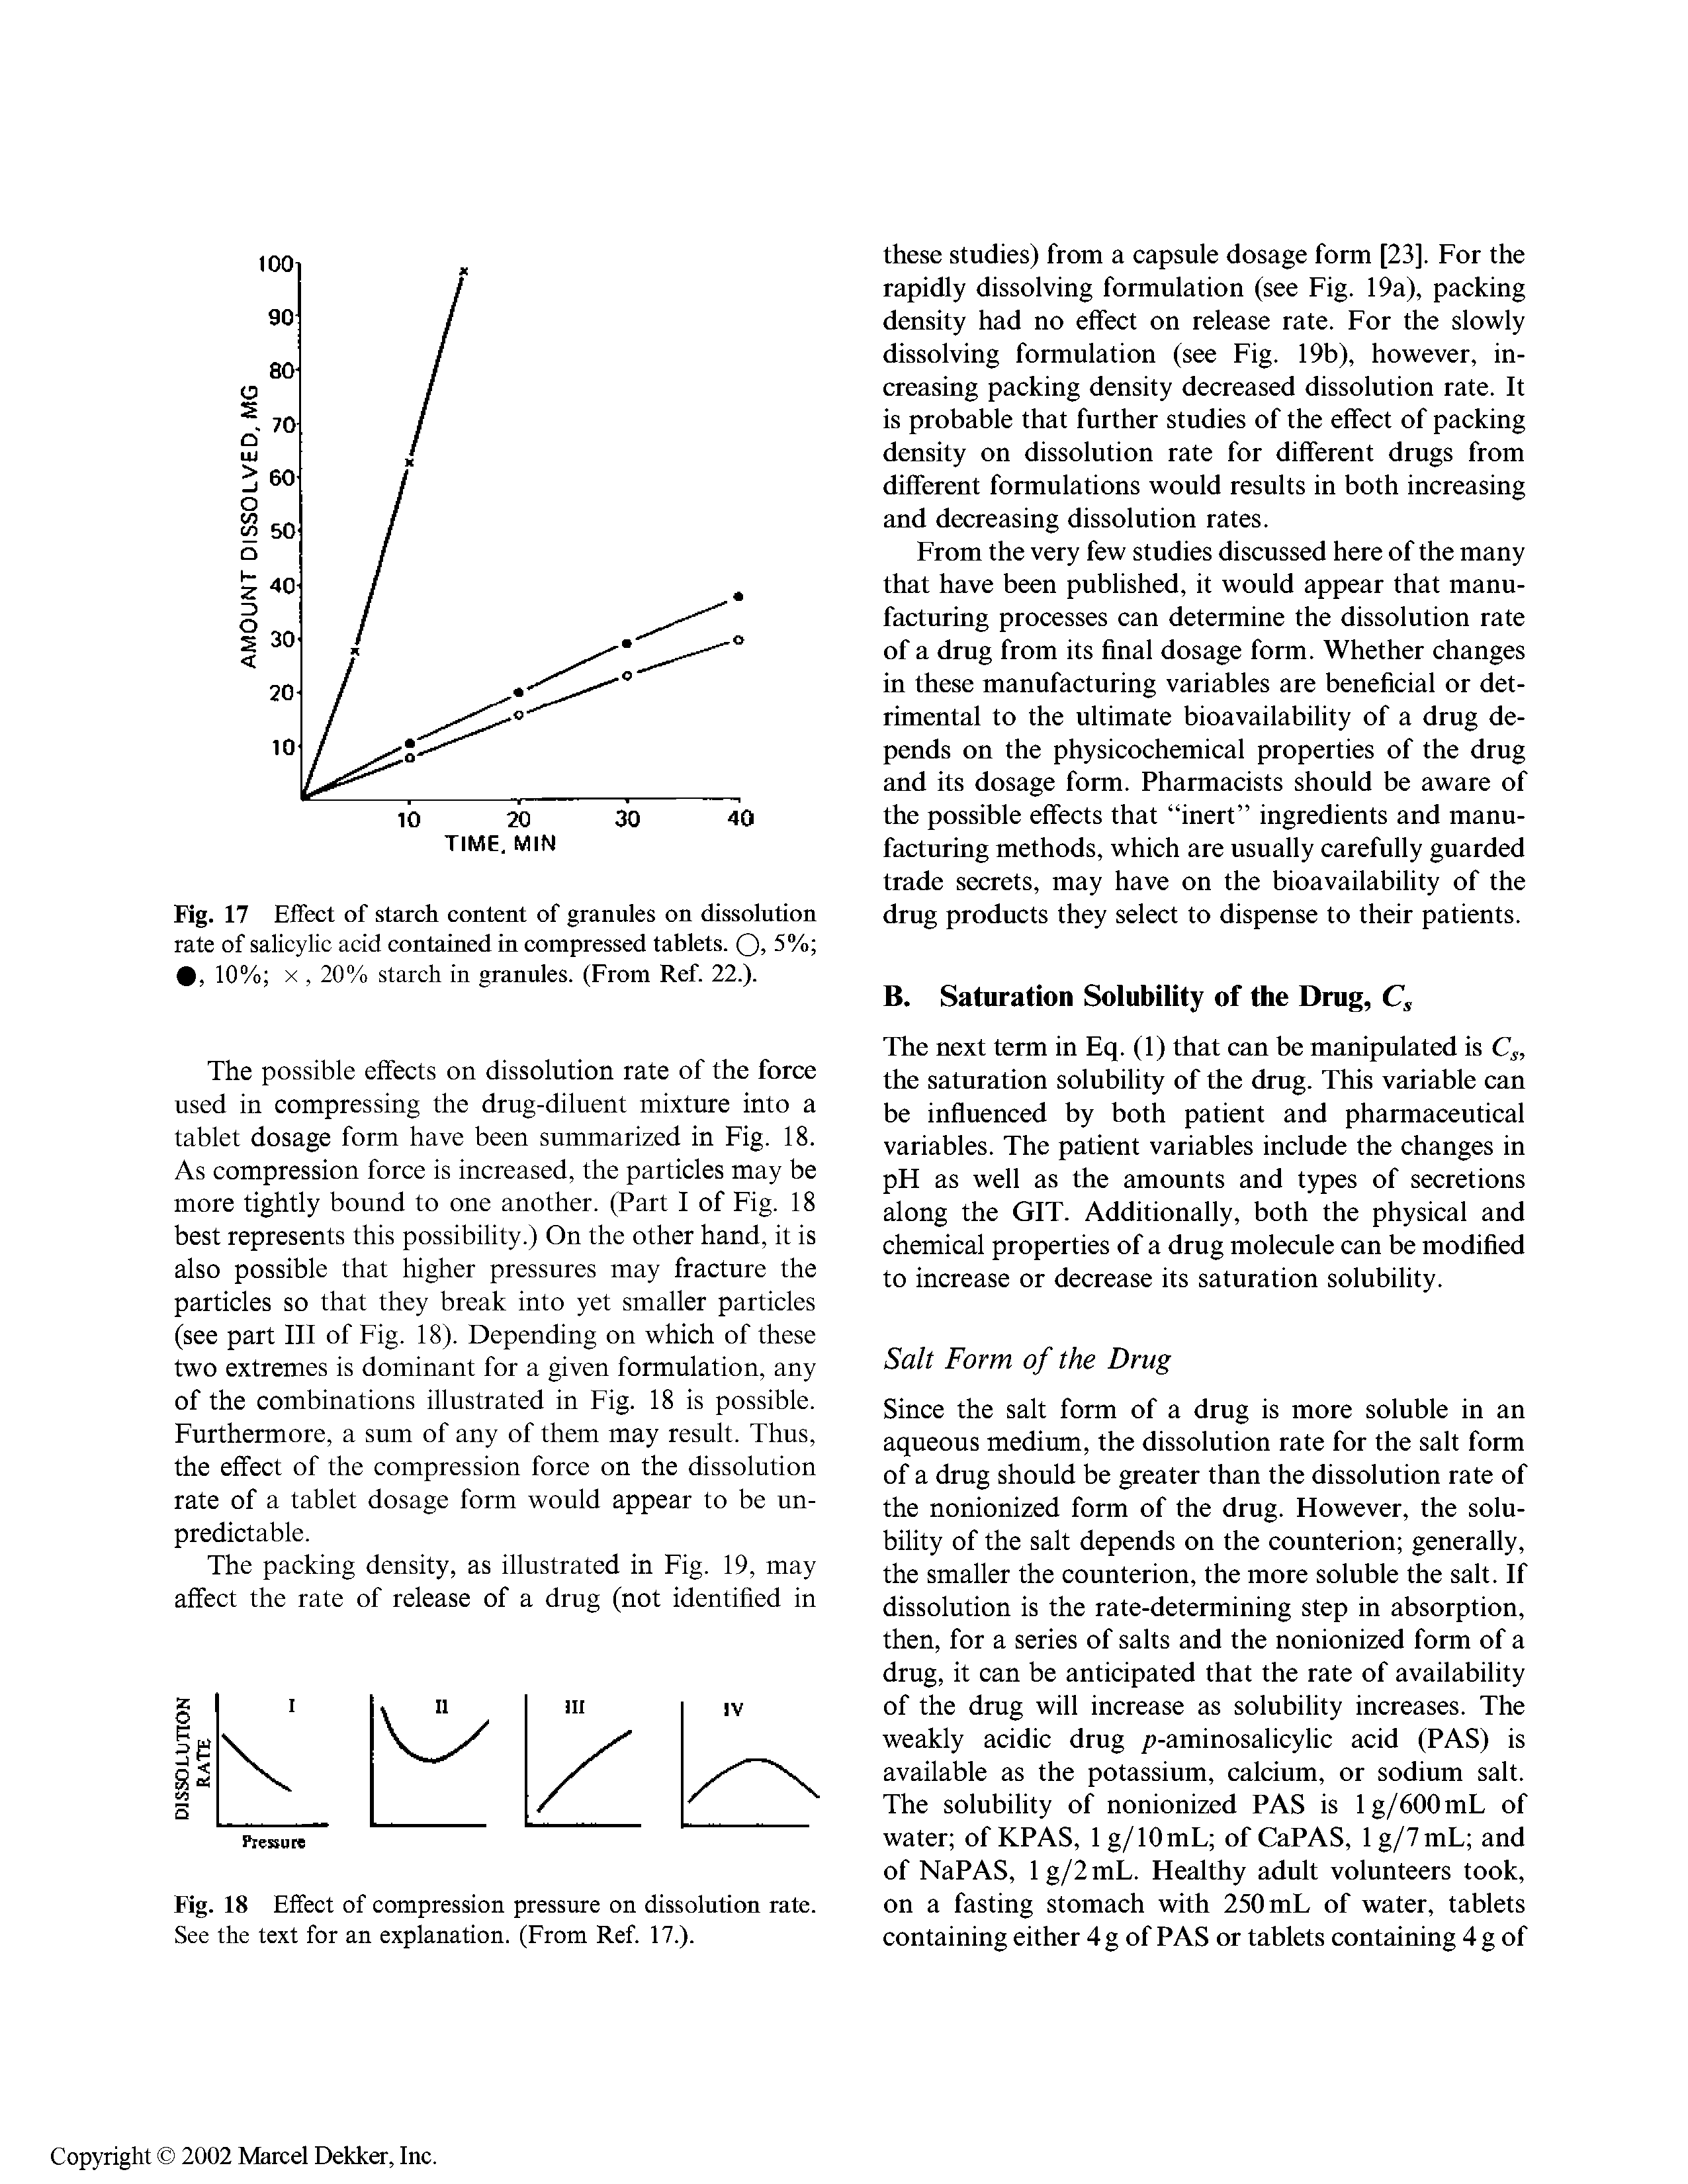 Fig. 18 Effect of compression pressure on dissolution rate. See the text for an explanation. (From Ref. 17.).